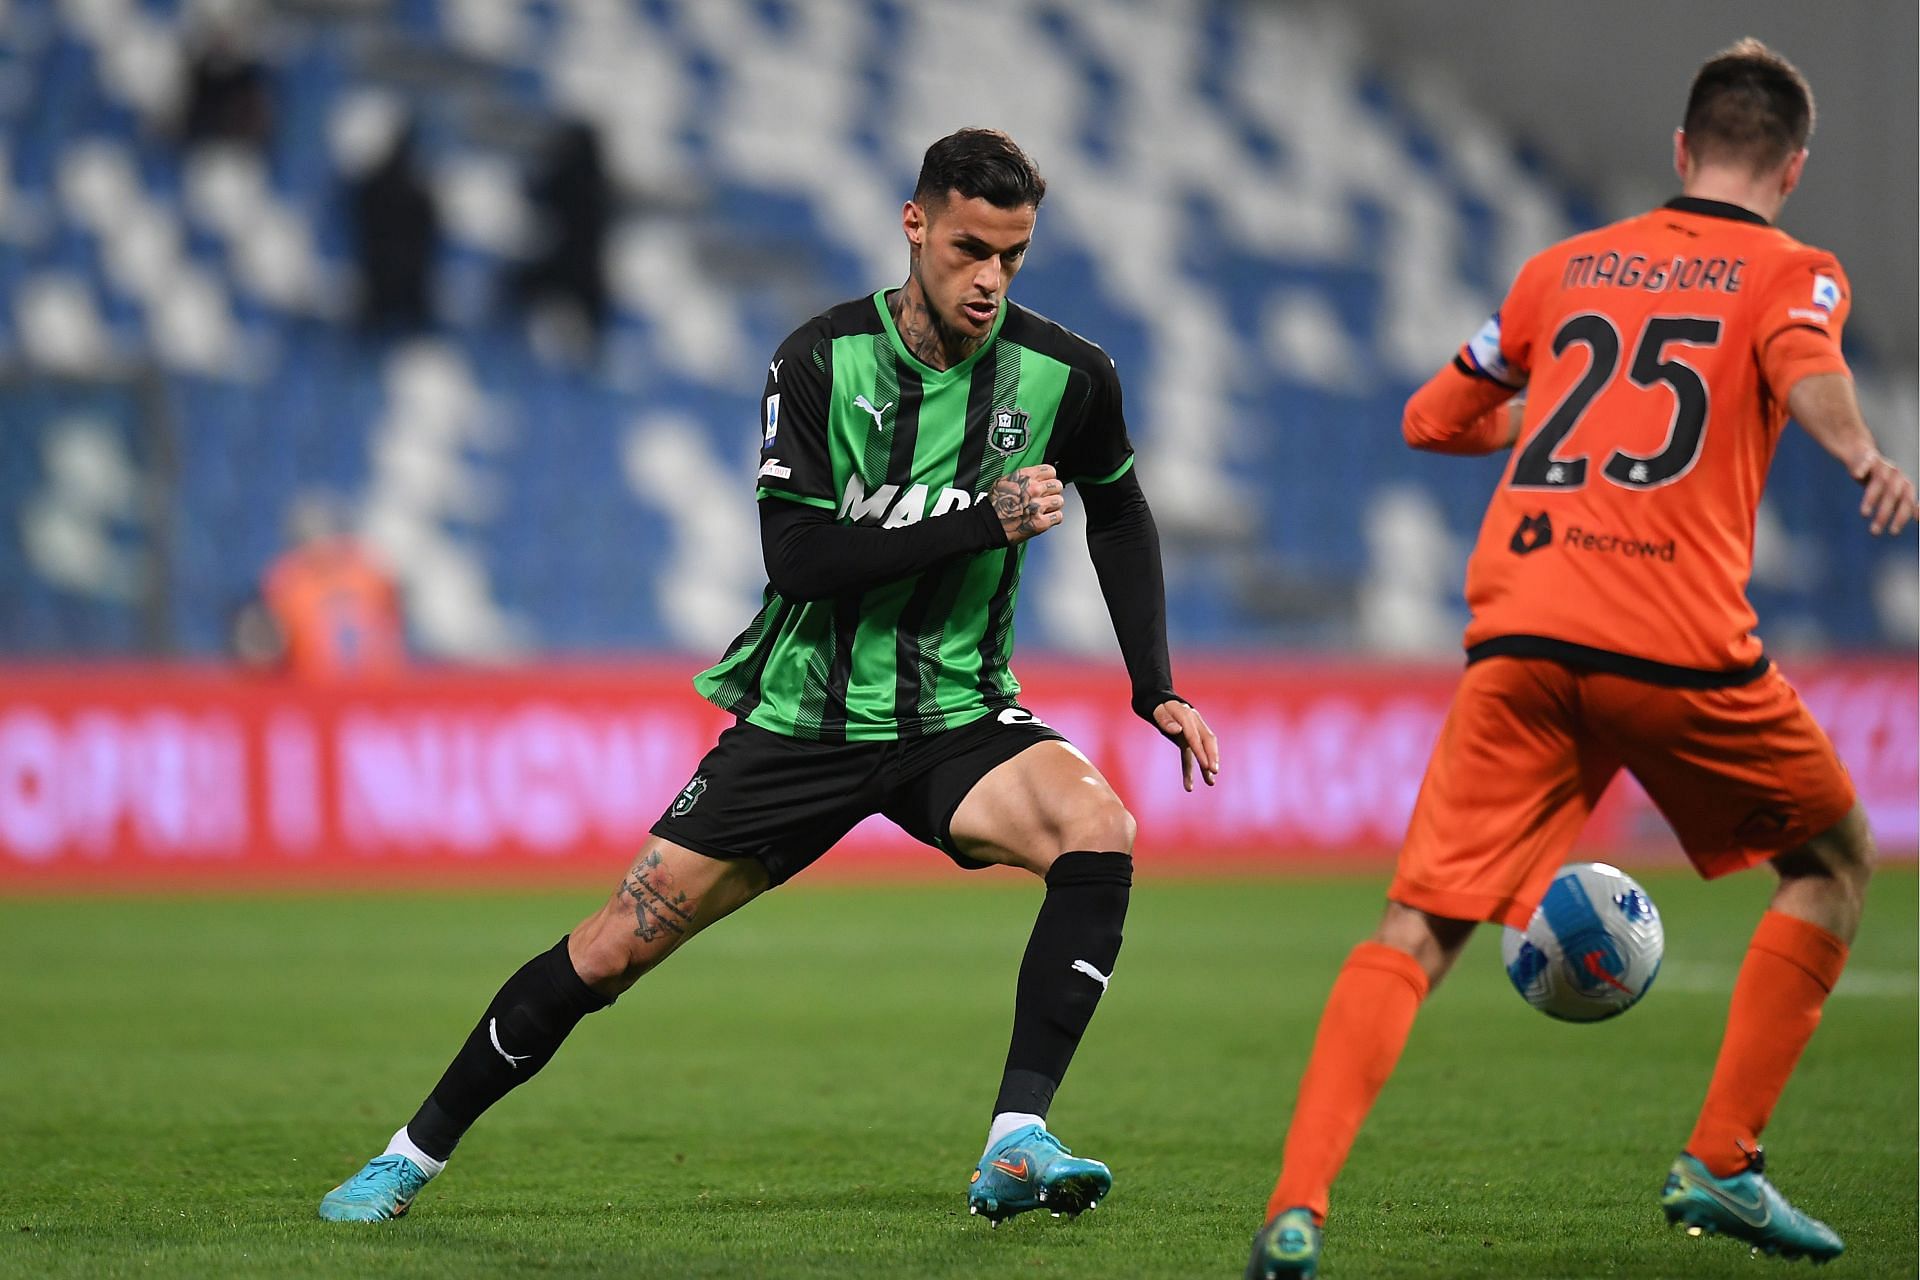 Gianluca Scamacca (Left) playing for Sassuolo